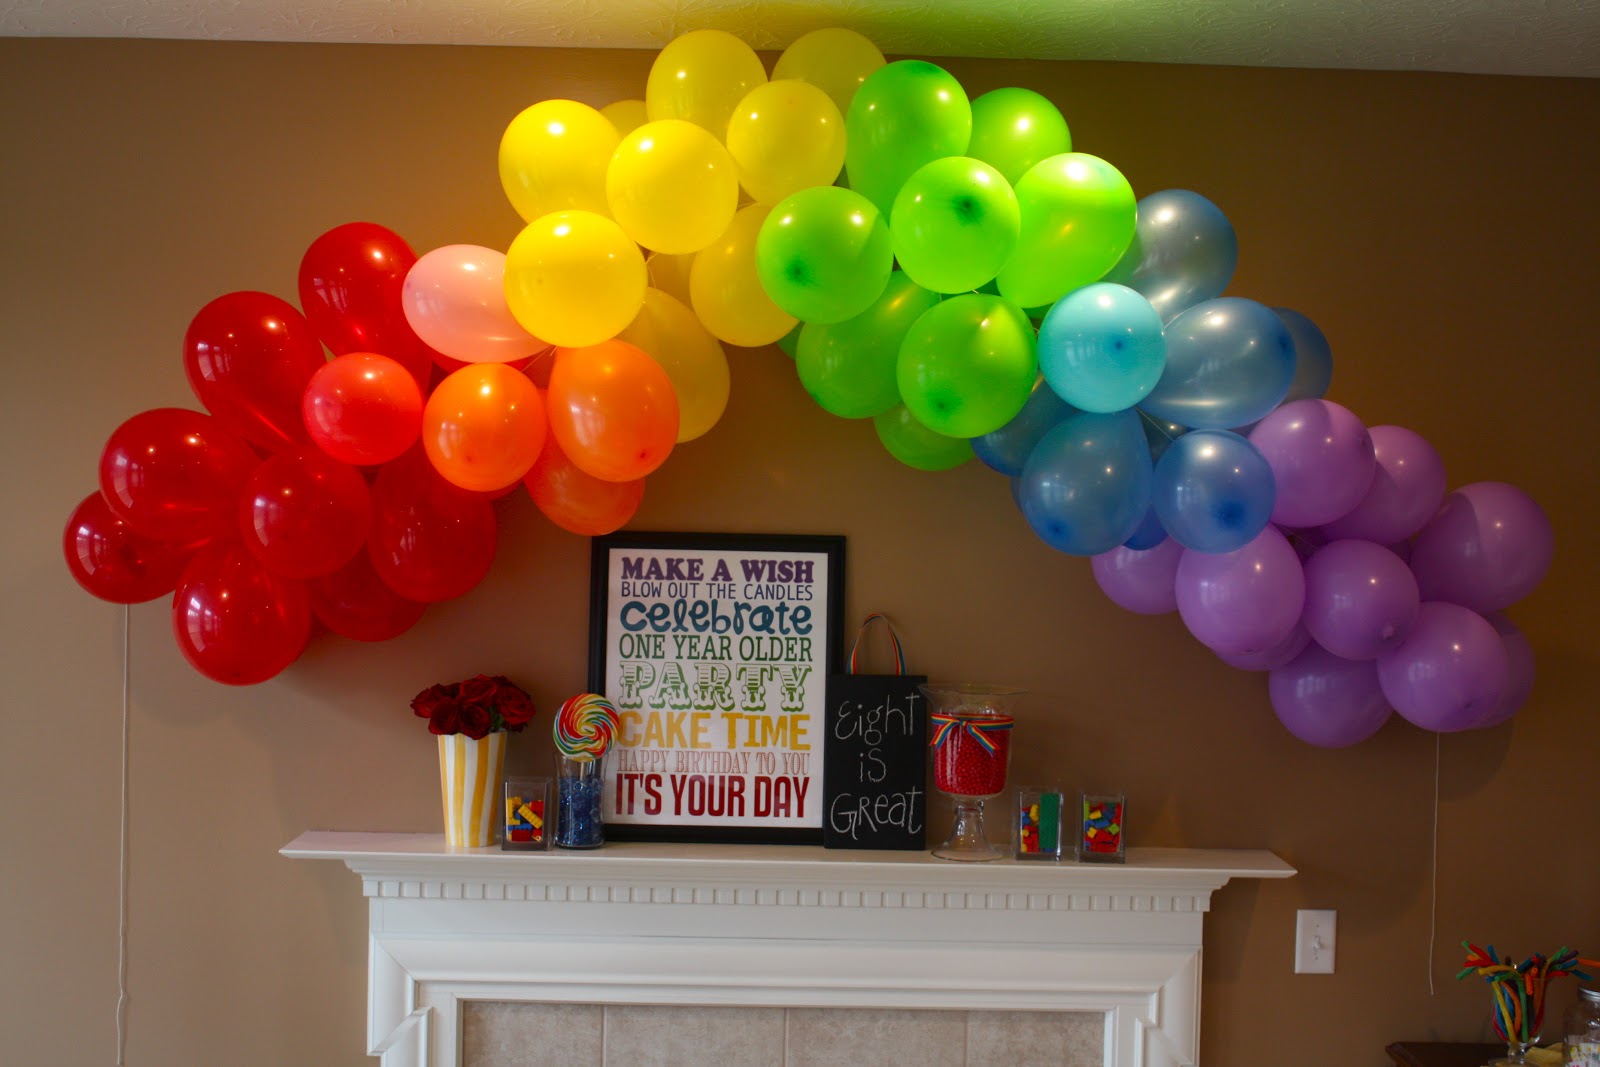 Rainbow Party Ideas For a Colorful Time